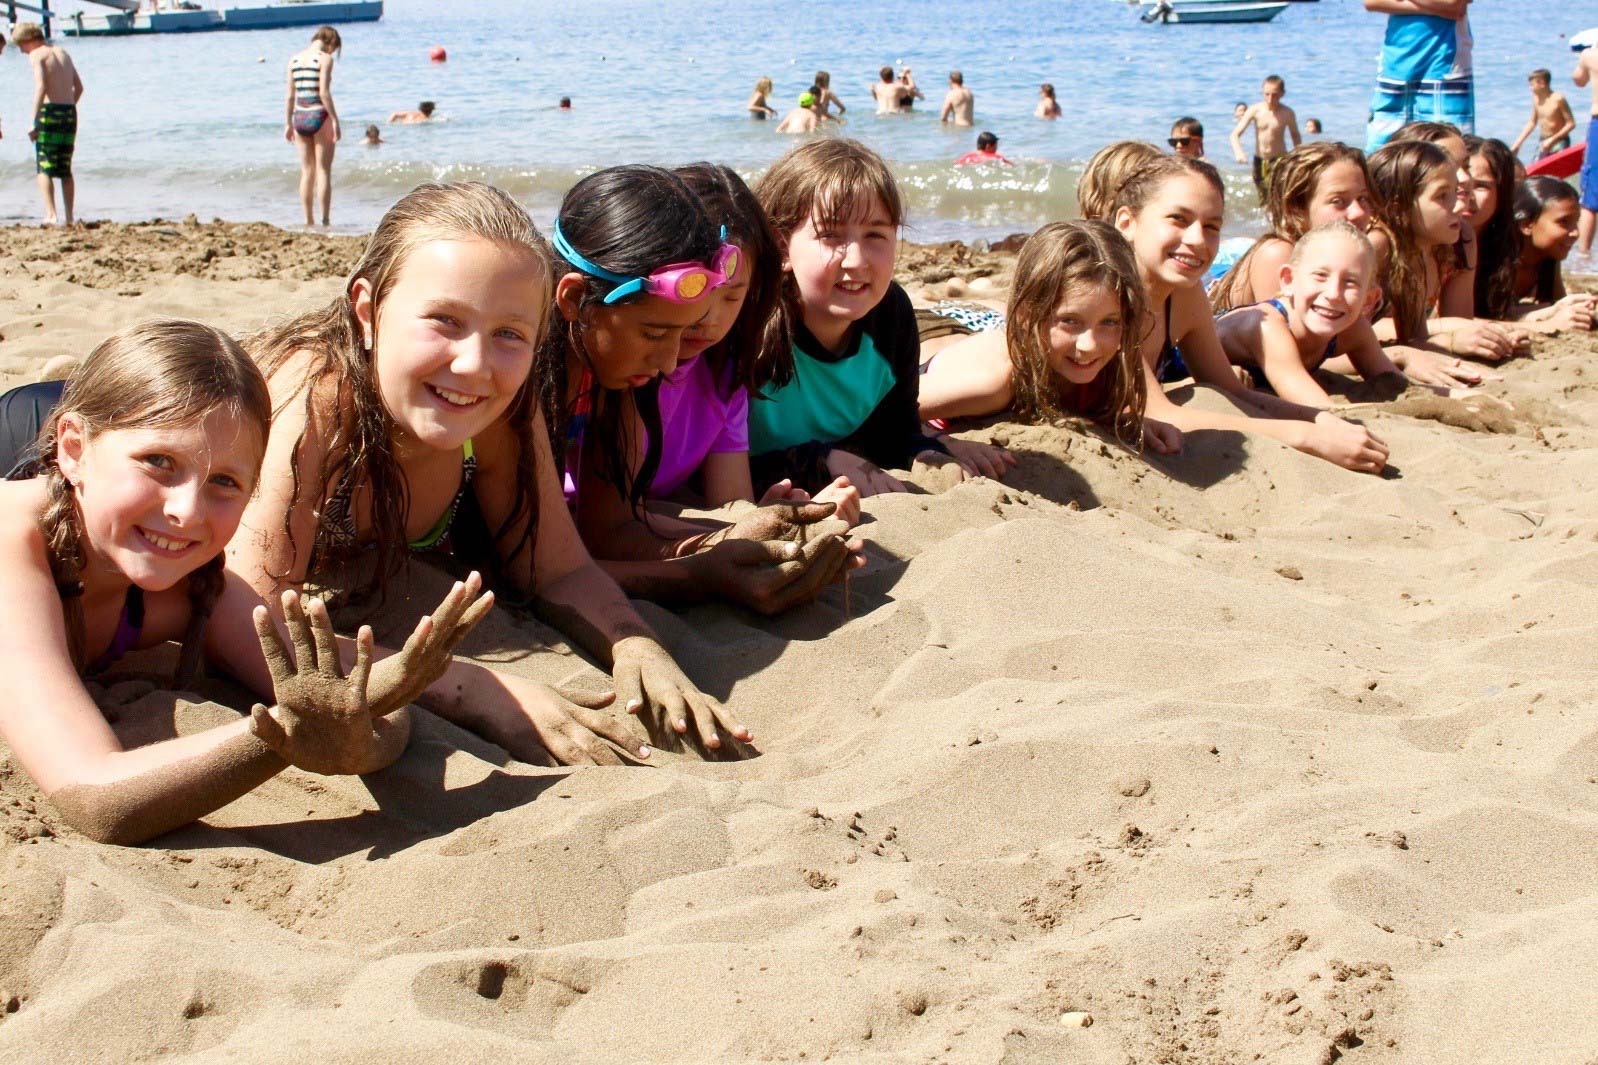 A group of campers playing in the sand during a beach party.